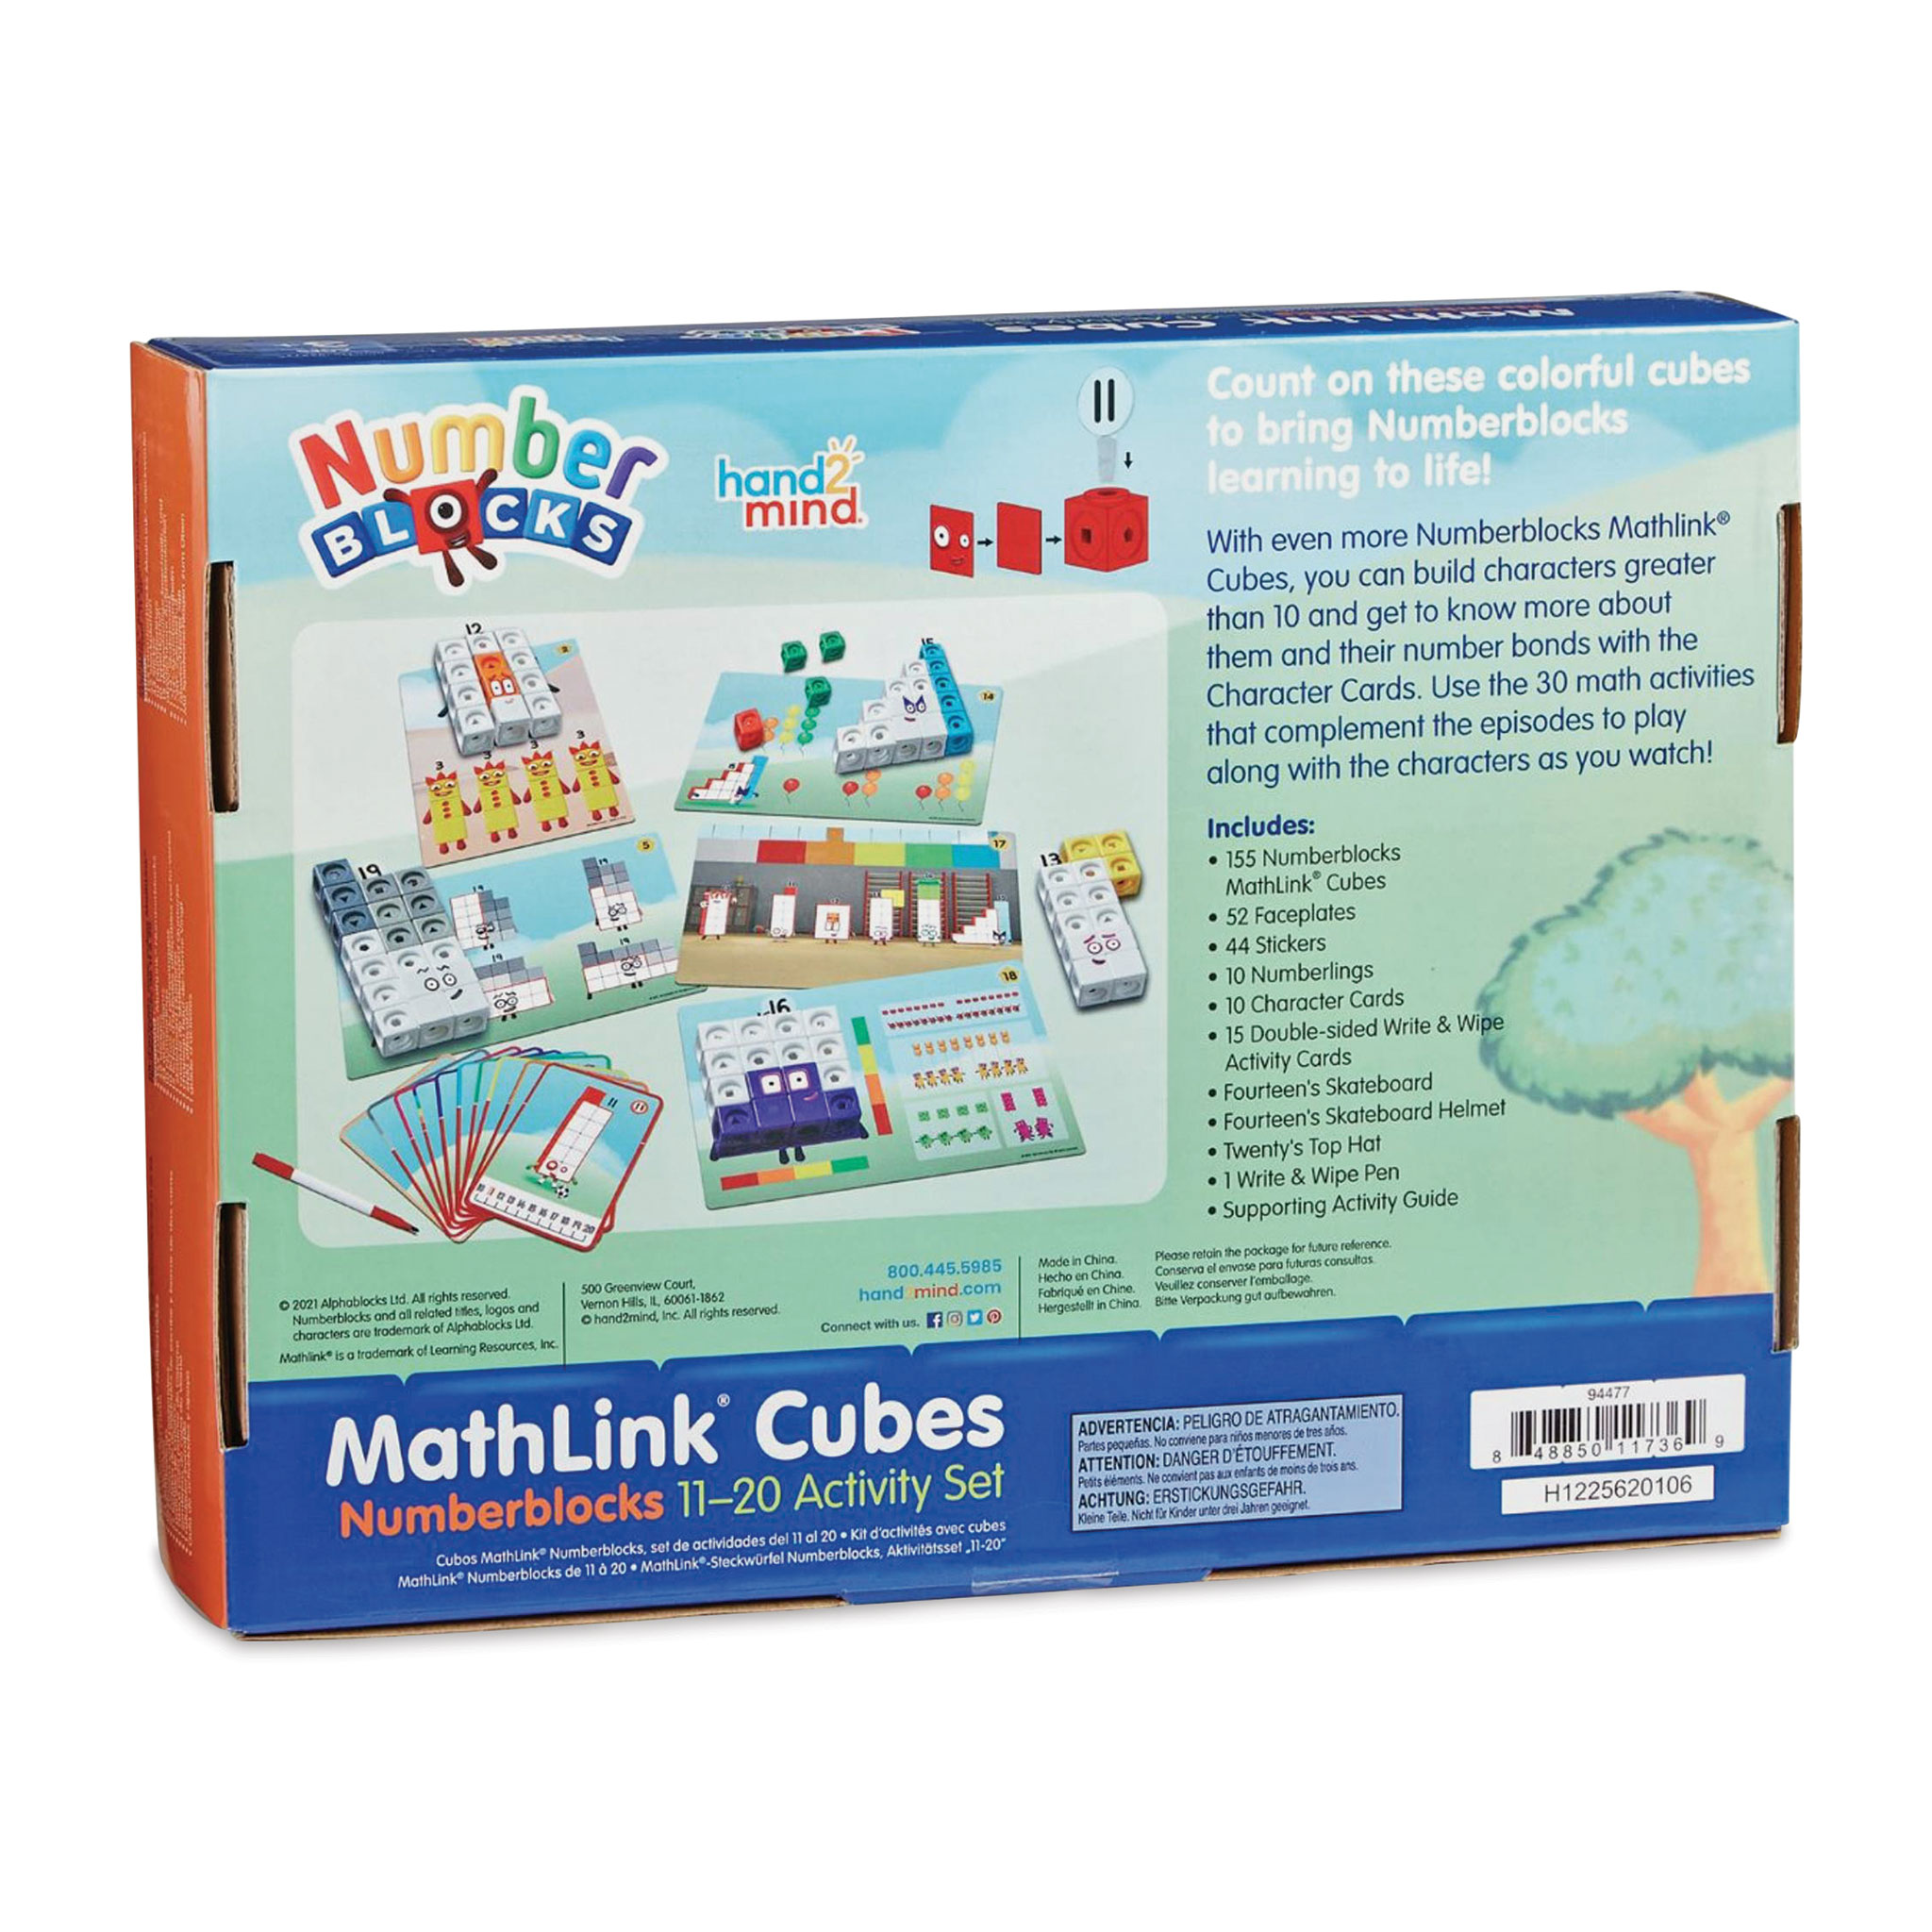 Numberblocks MathLink Cubes 11-20 Activity Set — INSPIRE Research Institute  for Pre-College Engineering